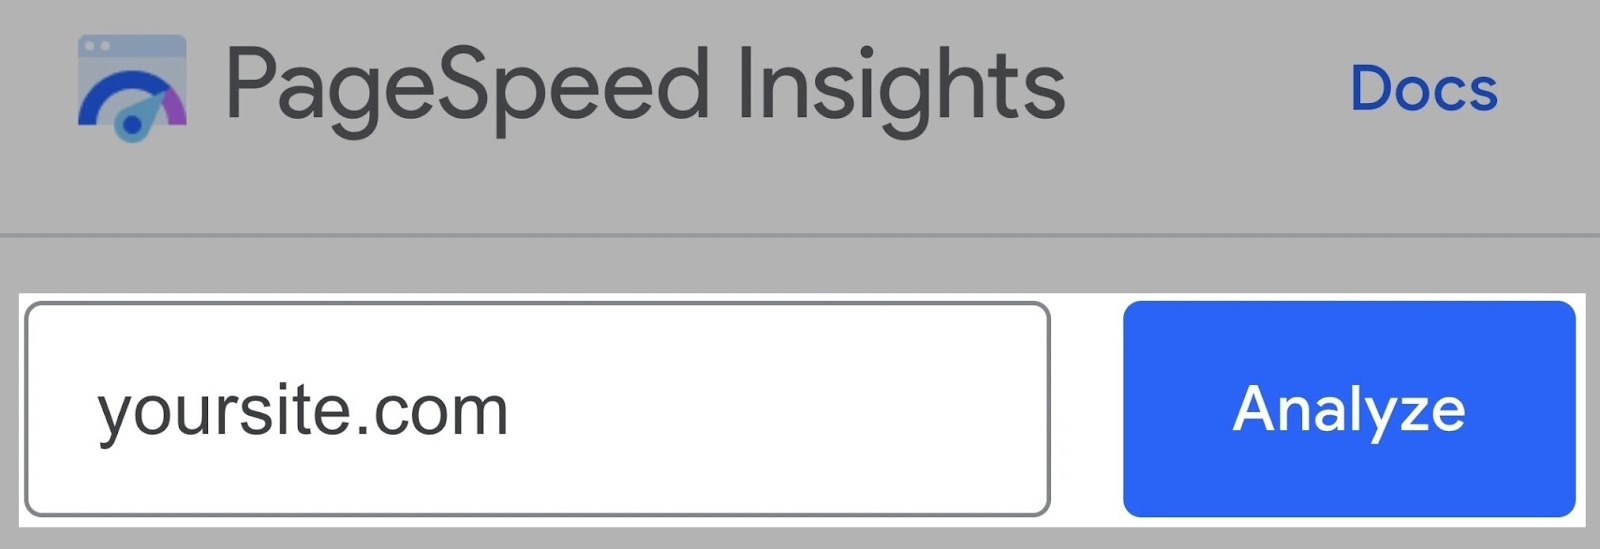 PageSpeed Insights tool